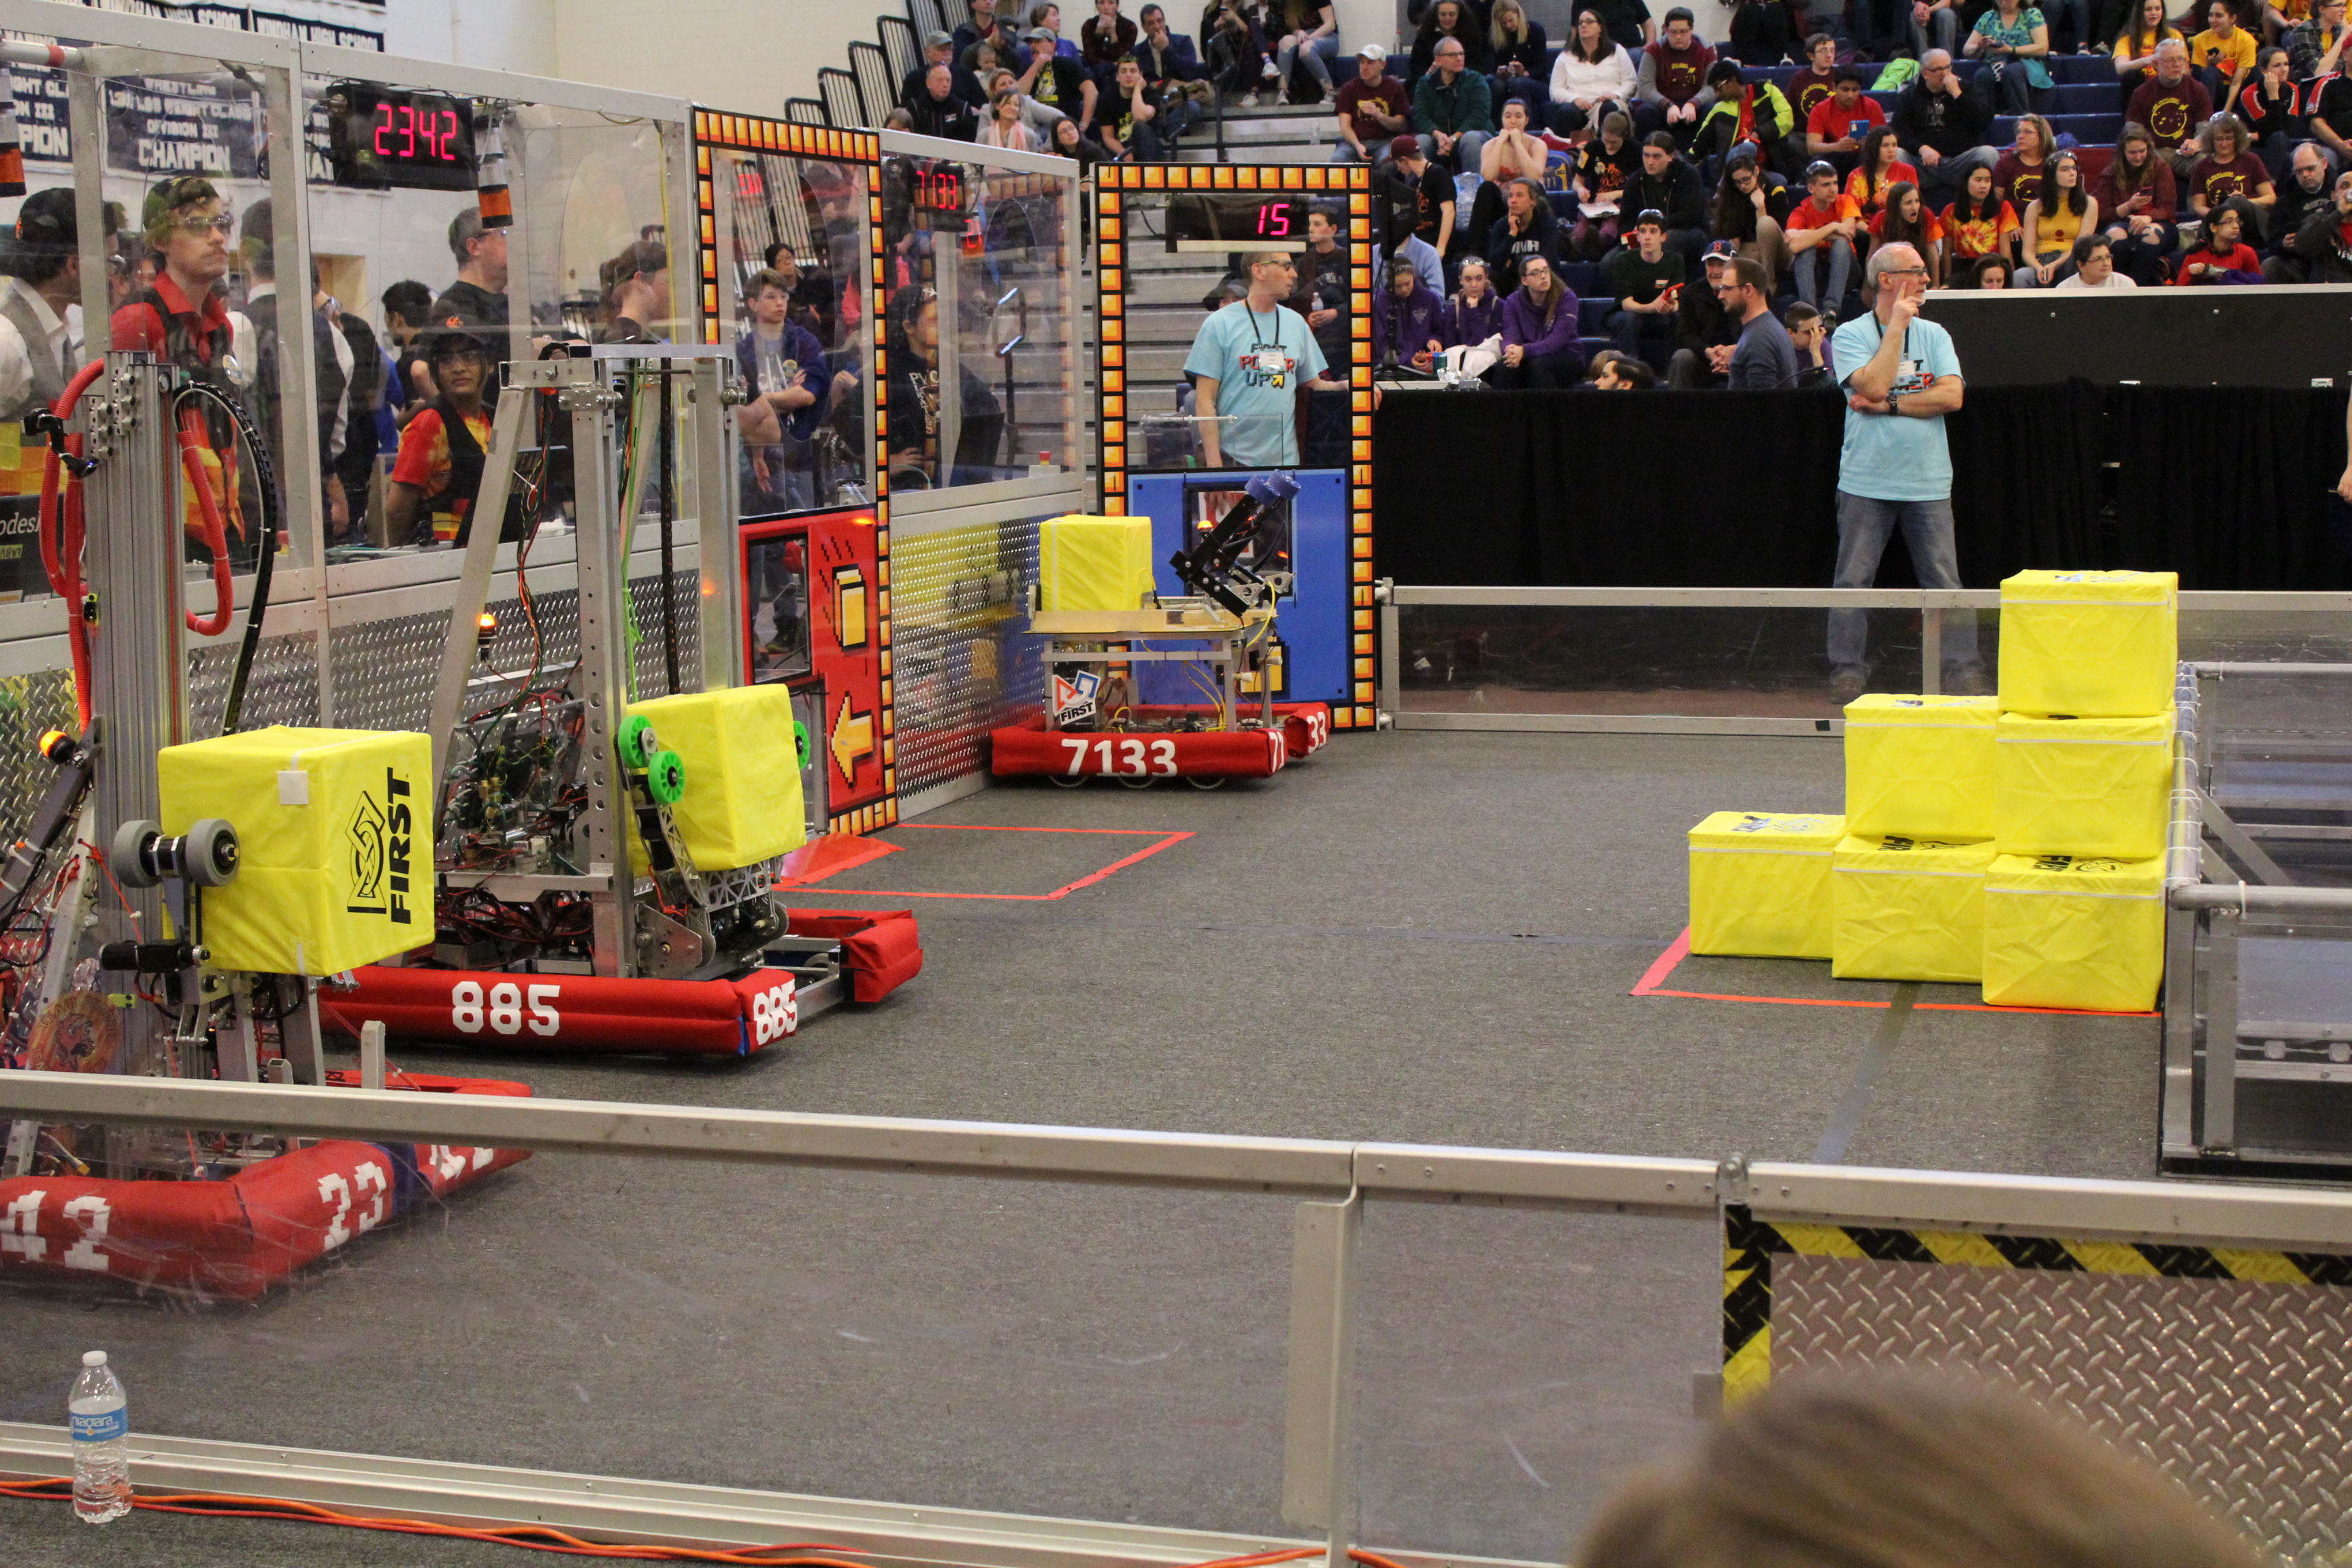 Robot On Field With Two Other Robots From Teams 885 And 2342 Waiting For A Match To Start